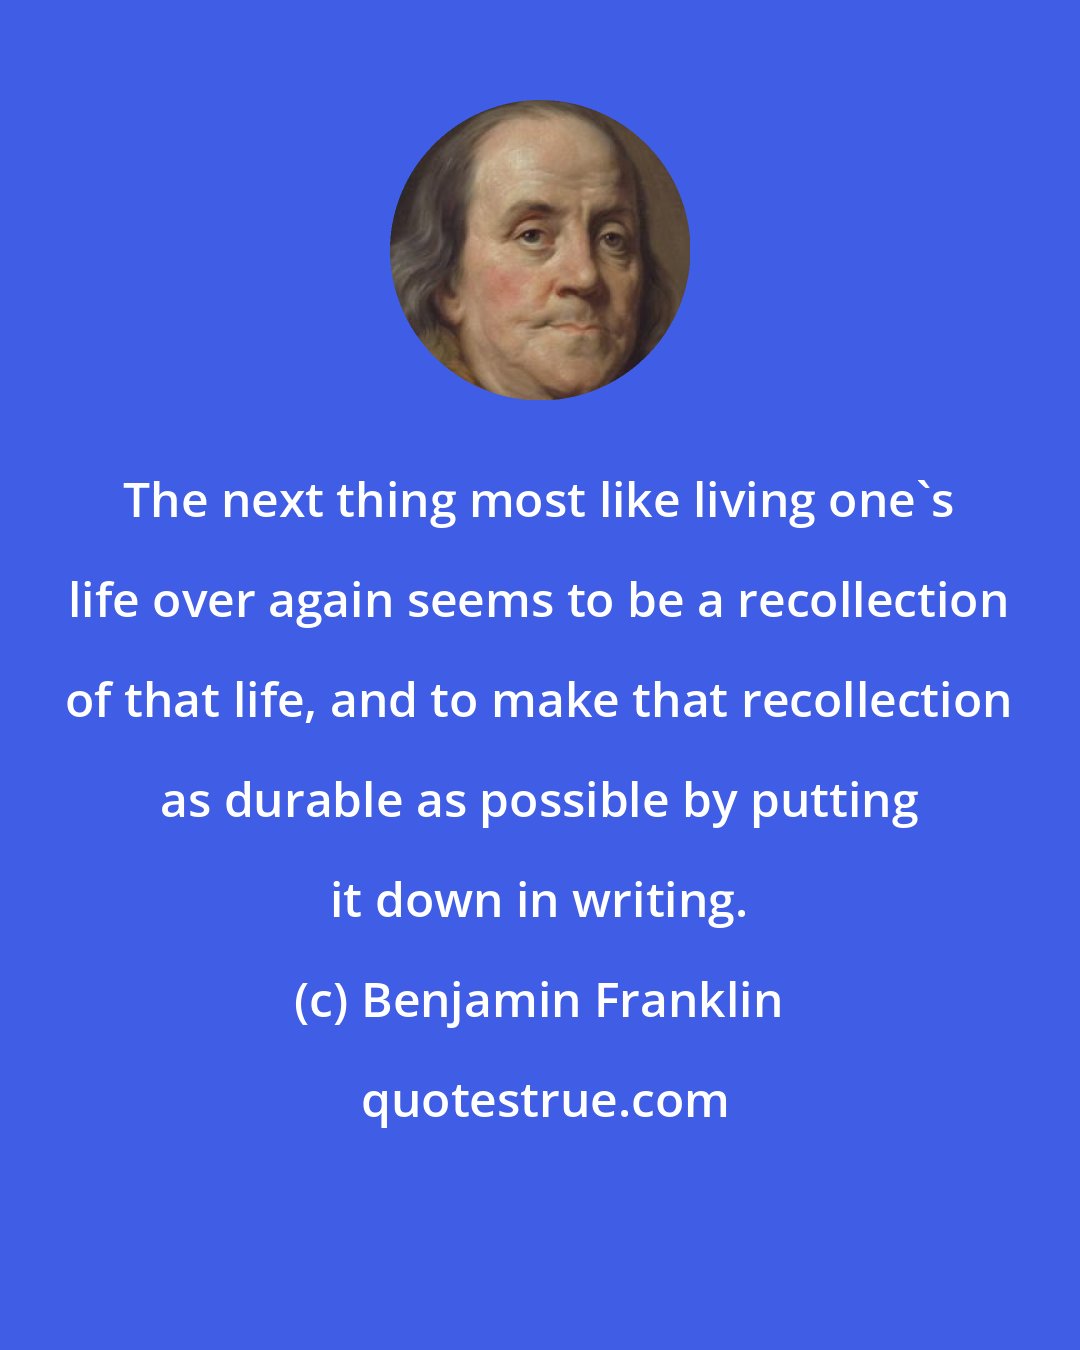 Benjamin Franklin: The next thing most like living one's life over again seems to be a recollection of that life, and to make that recollection as durable as possible by putting it down in writing.